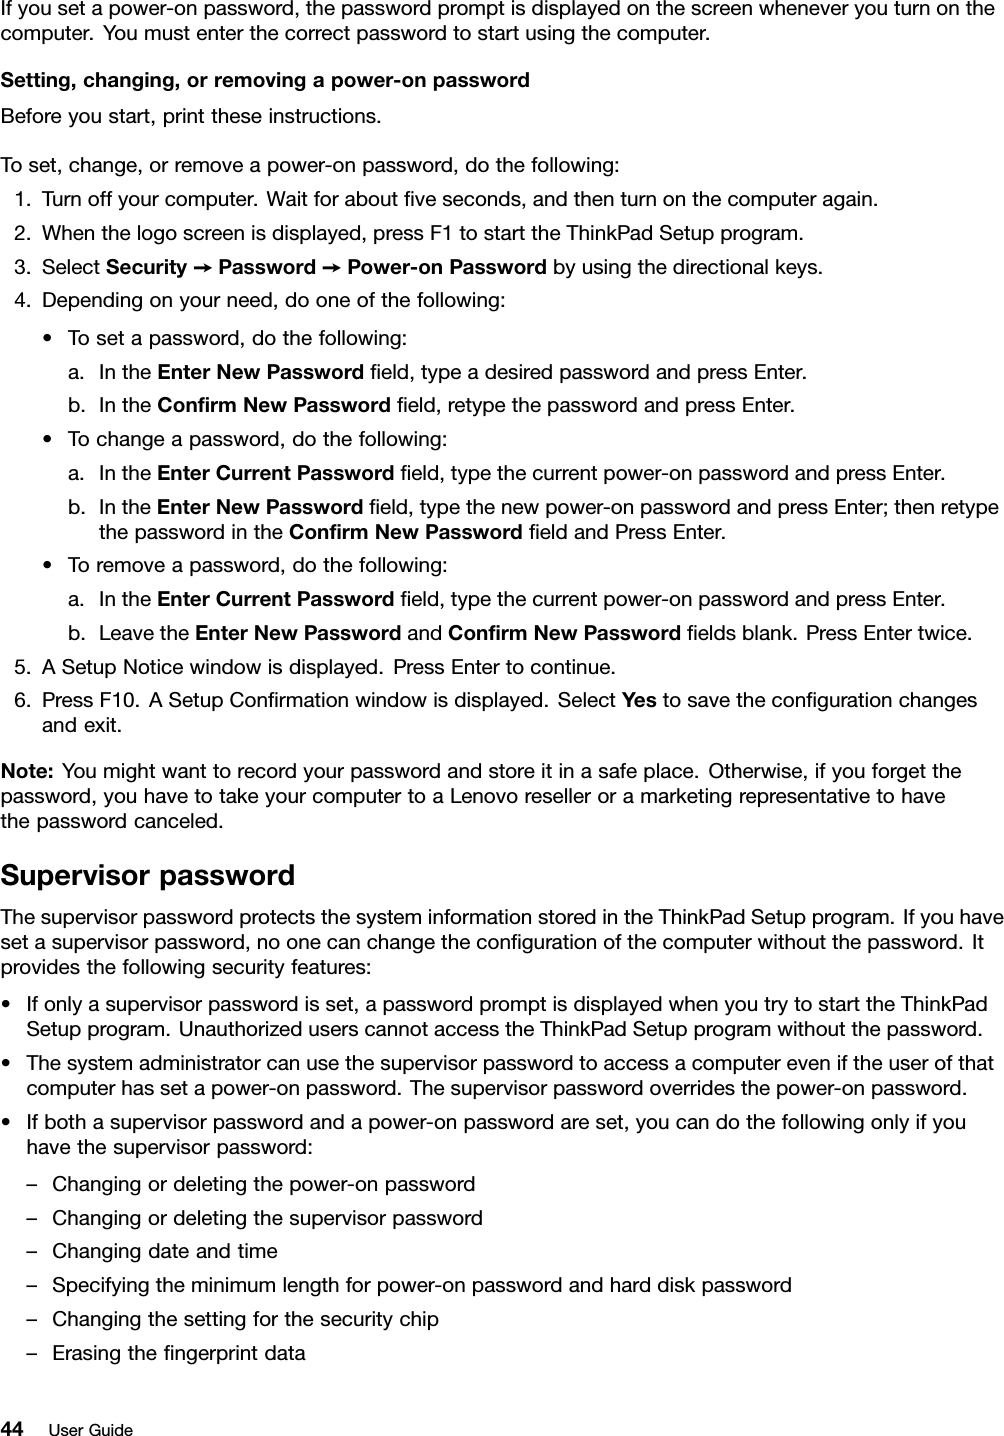 If you set a power-on password, the password prompt is displayed on the screen whenever you turn on thecomputer. You must enter the correct password to start using the computer.Setting, changing, or removing a power-on passwordBefore you start, print these instructions.To set, change, or remove a power-on password, do the following:1. Turn off your computer. Wait for about ﬁve seconds, and then turn on the computer again.2. When the logo screen is displayed, press F1 to start the ThinkPad Setup program.3. Select Security ➙Password ➙Power-on Password by using the directional keys.4. Depending on your need, do one of the following:• To set a password, do the following:a. In the Enter New Password ﬁeld, type a desired password and press Enter.b. In the Conﬁrm New Password ﬁeld, retype the password and press Enter.• To change a password, do the following:a. In the Enter Current Password ﬁeld, type the current power-on password and press Enter.b. In the Enter New Password ﬁeld, type the new power-on password and press Enter; then retypethe password in the Conﬁrm New Password ﬁeld and Press Enter.• To remove a password, do the following:a. In the Enter Current Password ﬁeld, type the current power-on password and press Enter.b. Leave the Enter New Password and Conﬁrm New Password ﬁelds blank. Press Enter twice.5. A Setup Notice window is displayed. Press Enter to continue.6. Press F10. A Setup Conﬁrmation window is displayed. Select Yes to save the conﬁguration changesand exit.Note: You might want to record your password and store it in a safe place. Otherwise, if you forget thepassword, you have to take your computer to a Lenovo reseller or a marketing representative to havethe password canceled.Supervisor passwordThe supervisor password protects the system information stored in the ThinkPad Setup program. If you haveset a supervisor password, no one can change the conﬁguration of the computer without the password. Itprovides the following security features:• If only a supervisor password is set, a password prompt is displayed when you try to start the ThinkPadSetup program. Unauthorized users cannot access the ThinkPad Setup program without the password.• The system administrator can use the supervisor password to access a computer even if the user of thatcomputer has set a power-on password. The supervisor password overrides the power-on password.• If both a supervisor password and a power-on password are set, you can do the following only if youhave the supervisor password:– Changing or deleting the power-on password– Changing or deleting the supervisor password– Changing date and time– Specifying the minimum length for power-on password and hard disk password– Changing the setting for the security chip– Erasing the ﬁngerprint data44 User Guide